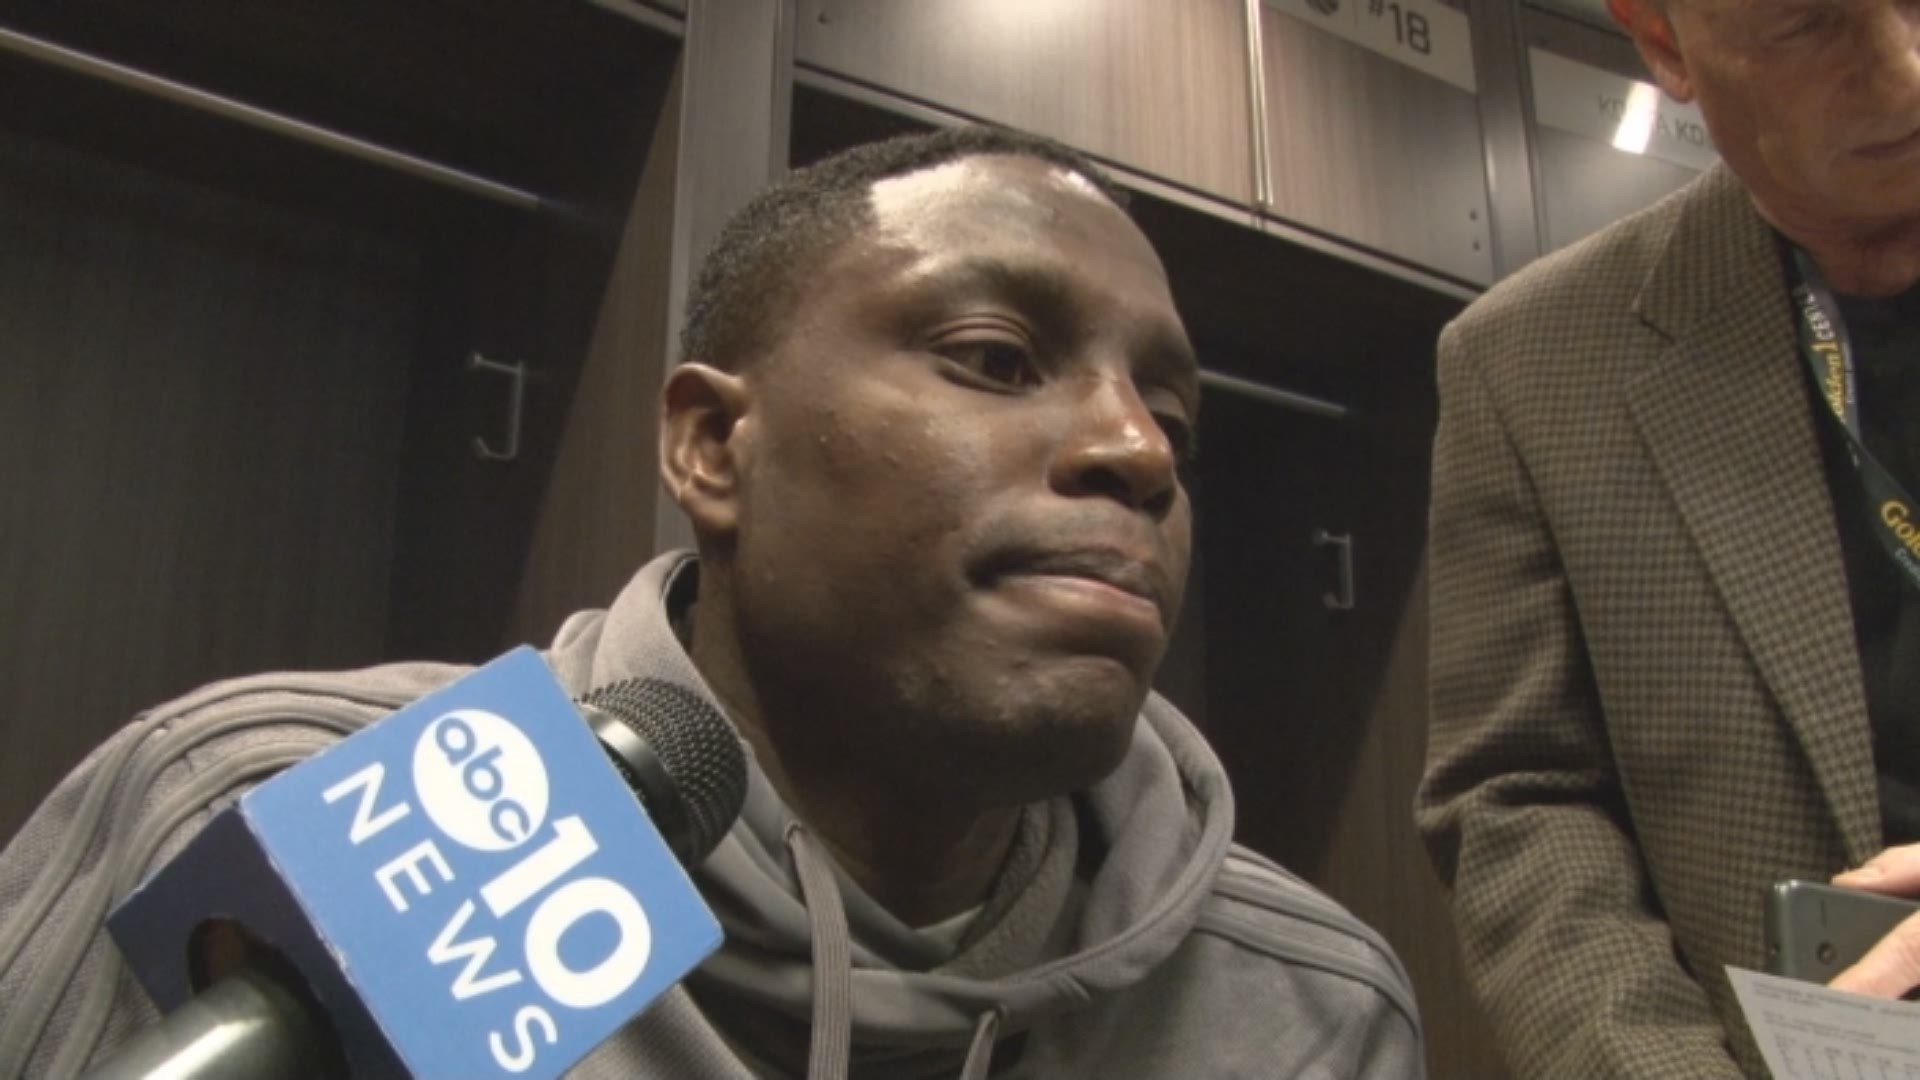 Sacramento Kings point guard Darren Collison talks about the somber locker room following Wednesday's loss to the Indiana Pacers, where his teammate Rudy Gay suffered what's believed to be a season-ending Achilles injury.